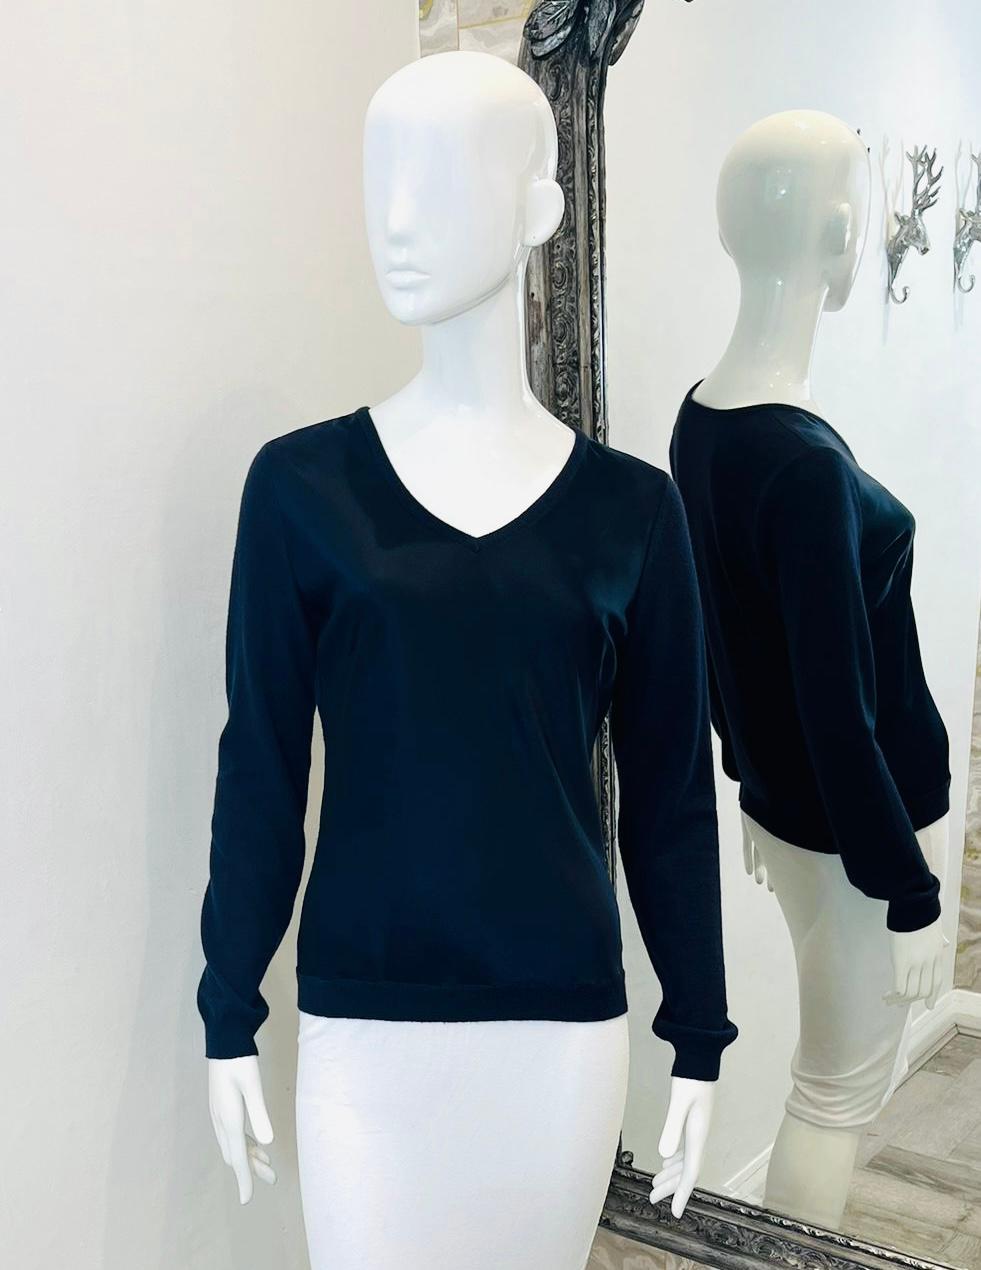 Ralph Lauren V-Neck Knitted Jumper

Navy jumper designed with waxed effect to the front and contrasting knitted texture to the sleeves and rear.

Featuring long sleeves and fitted silhouette.

Size – L

Condition – Very Good 

Composition – Label